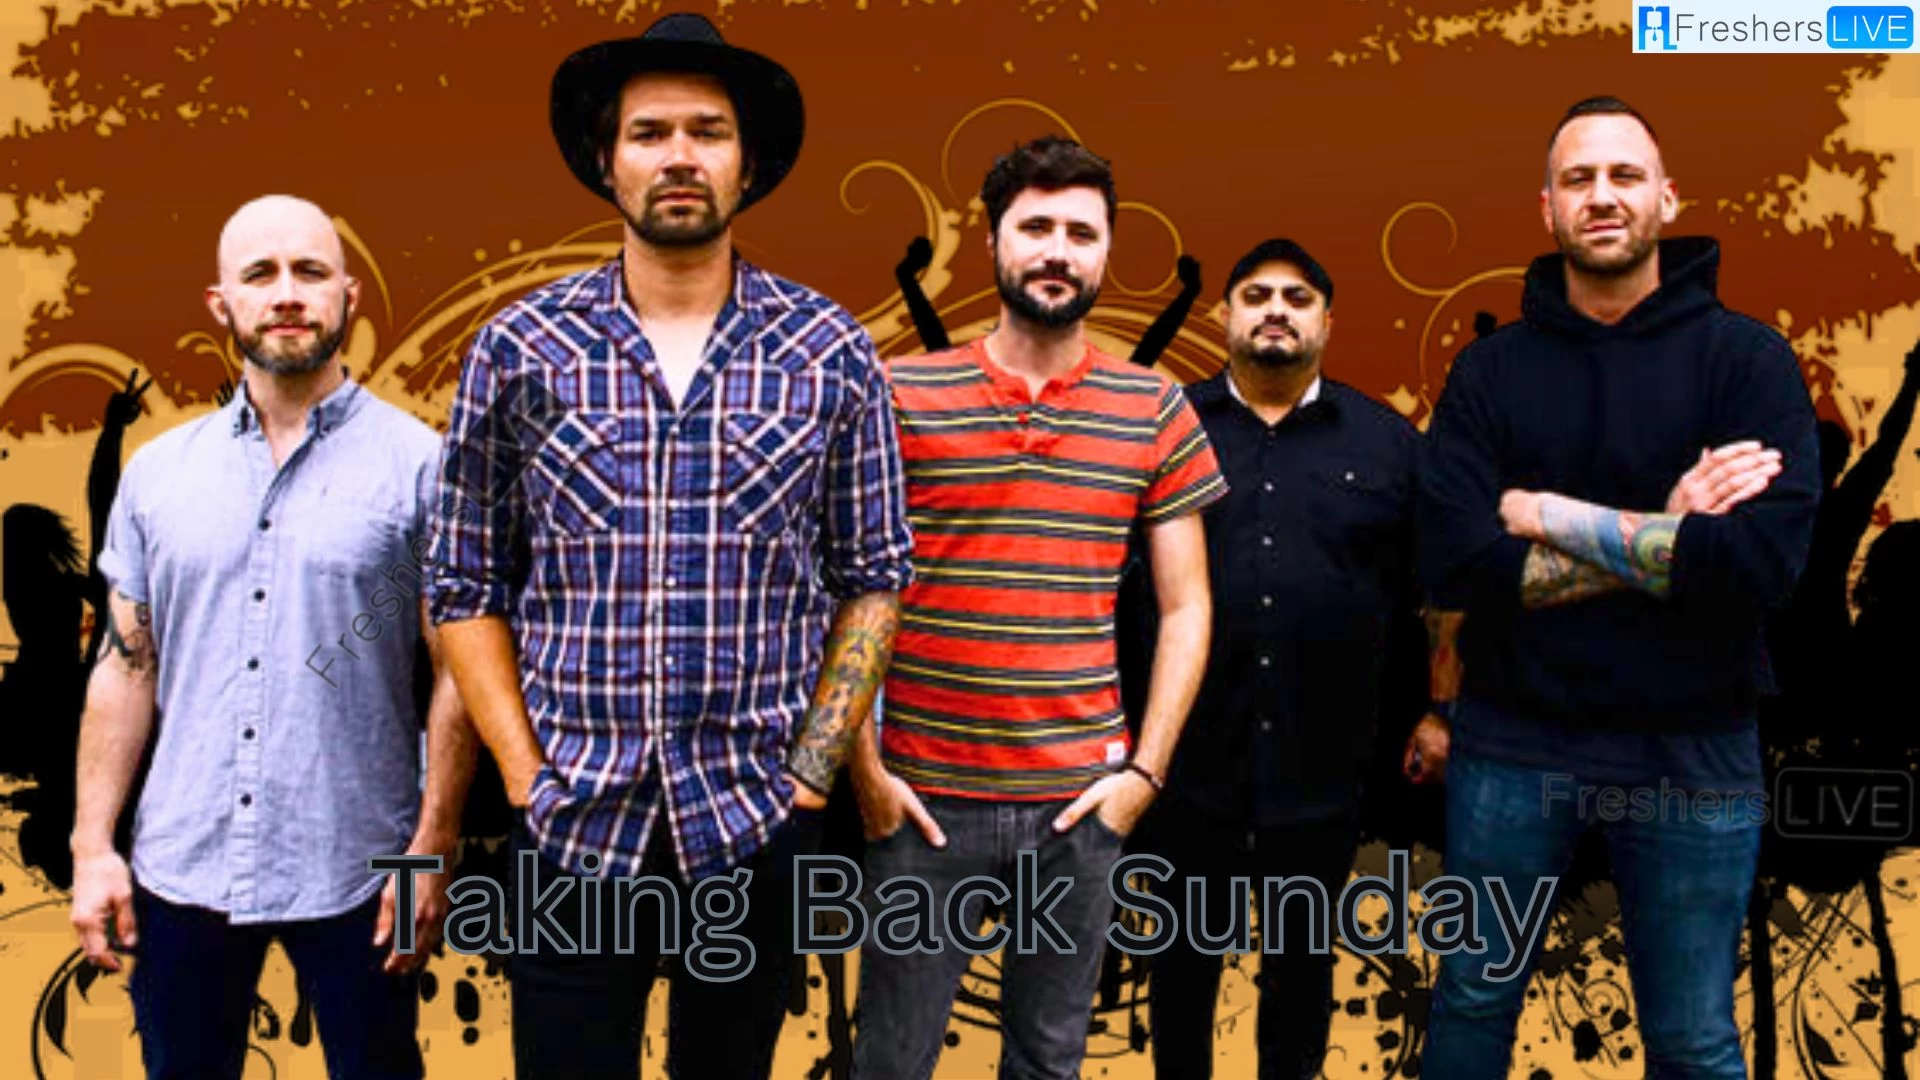 Taking Back Sunday Presale Code 2023, How to Get Taking Back Sunday Presale Tickets?